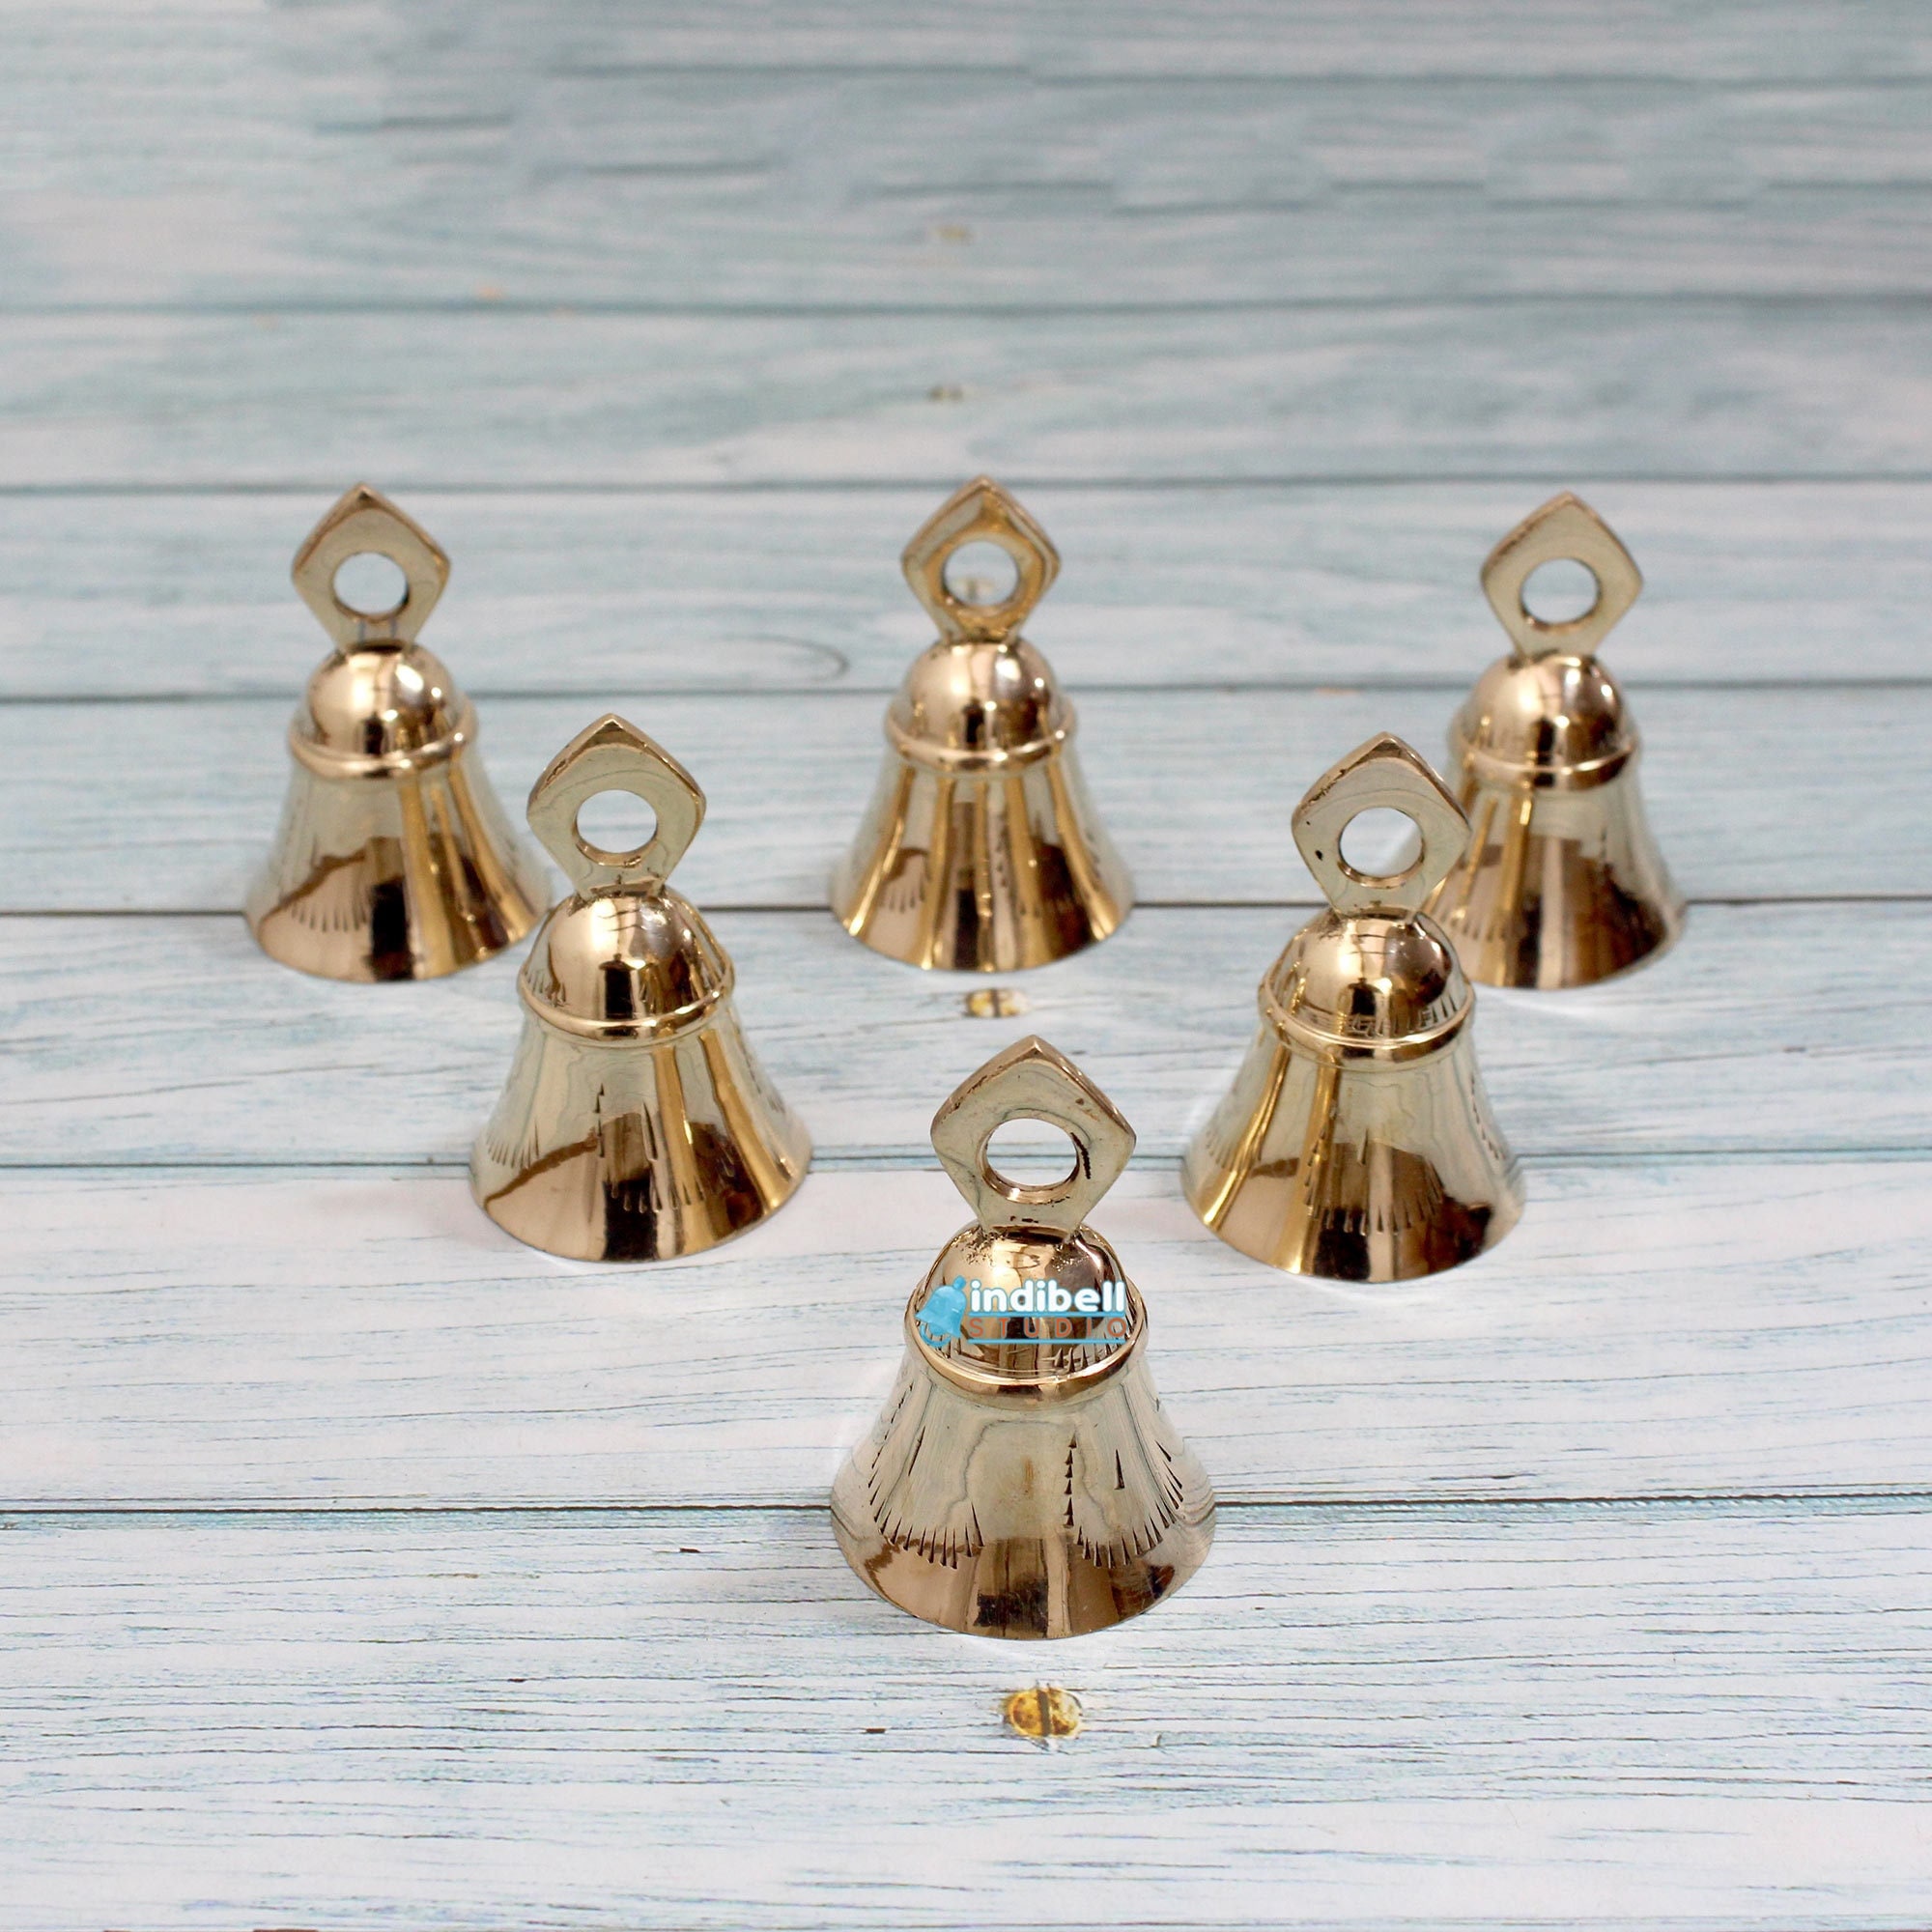 TINY RUSTIC GOLD Bells-10 Micro Cone Shape Triangular Bells-so Sweet-barely  1 1/4perfect for Small Crafts, Doll House,fairy Garden,jewelry 